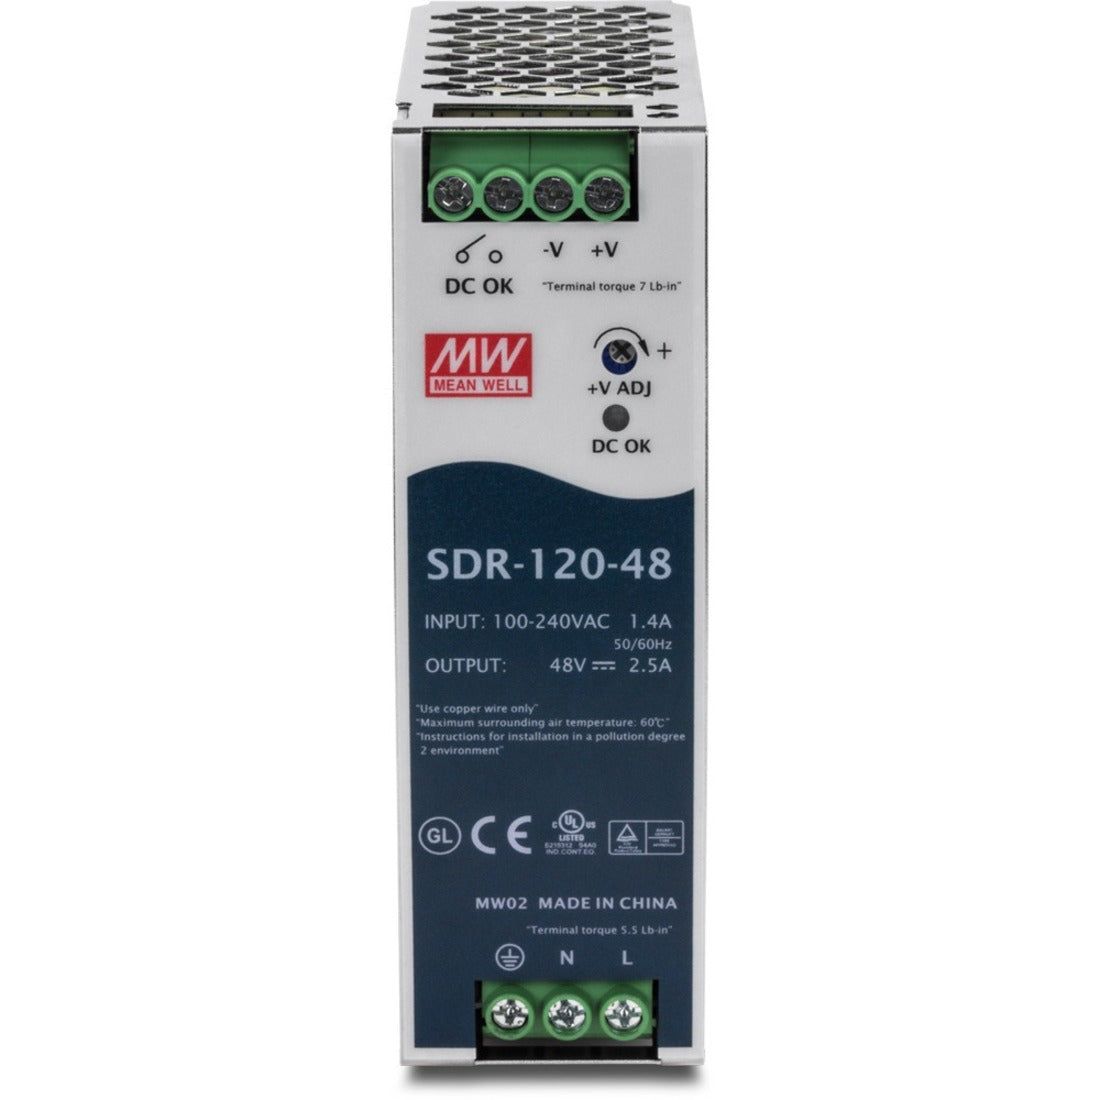 TRENDnet TI-S12048 DIN Rail 48V 120W Power Supply for TI-PG541, Extreme -25 to 70 °C Operating Temp, Overload Protection, Silver